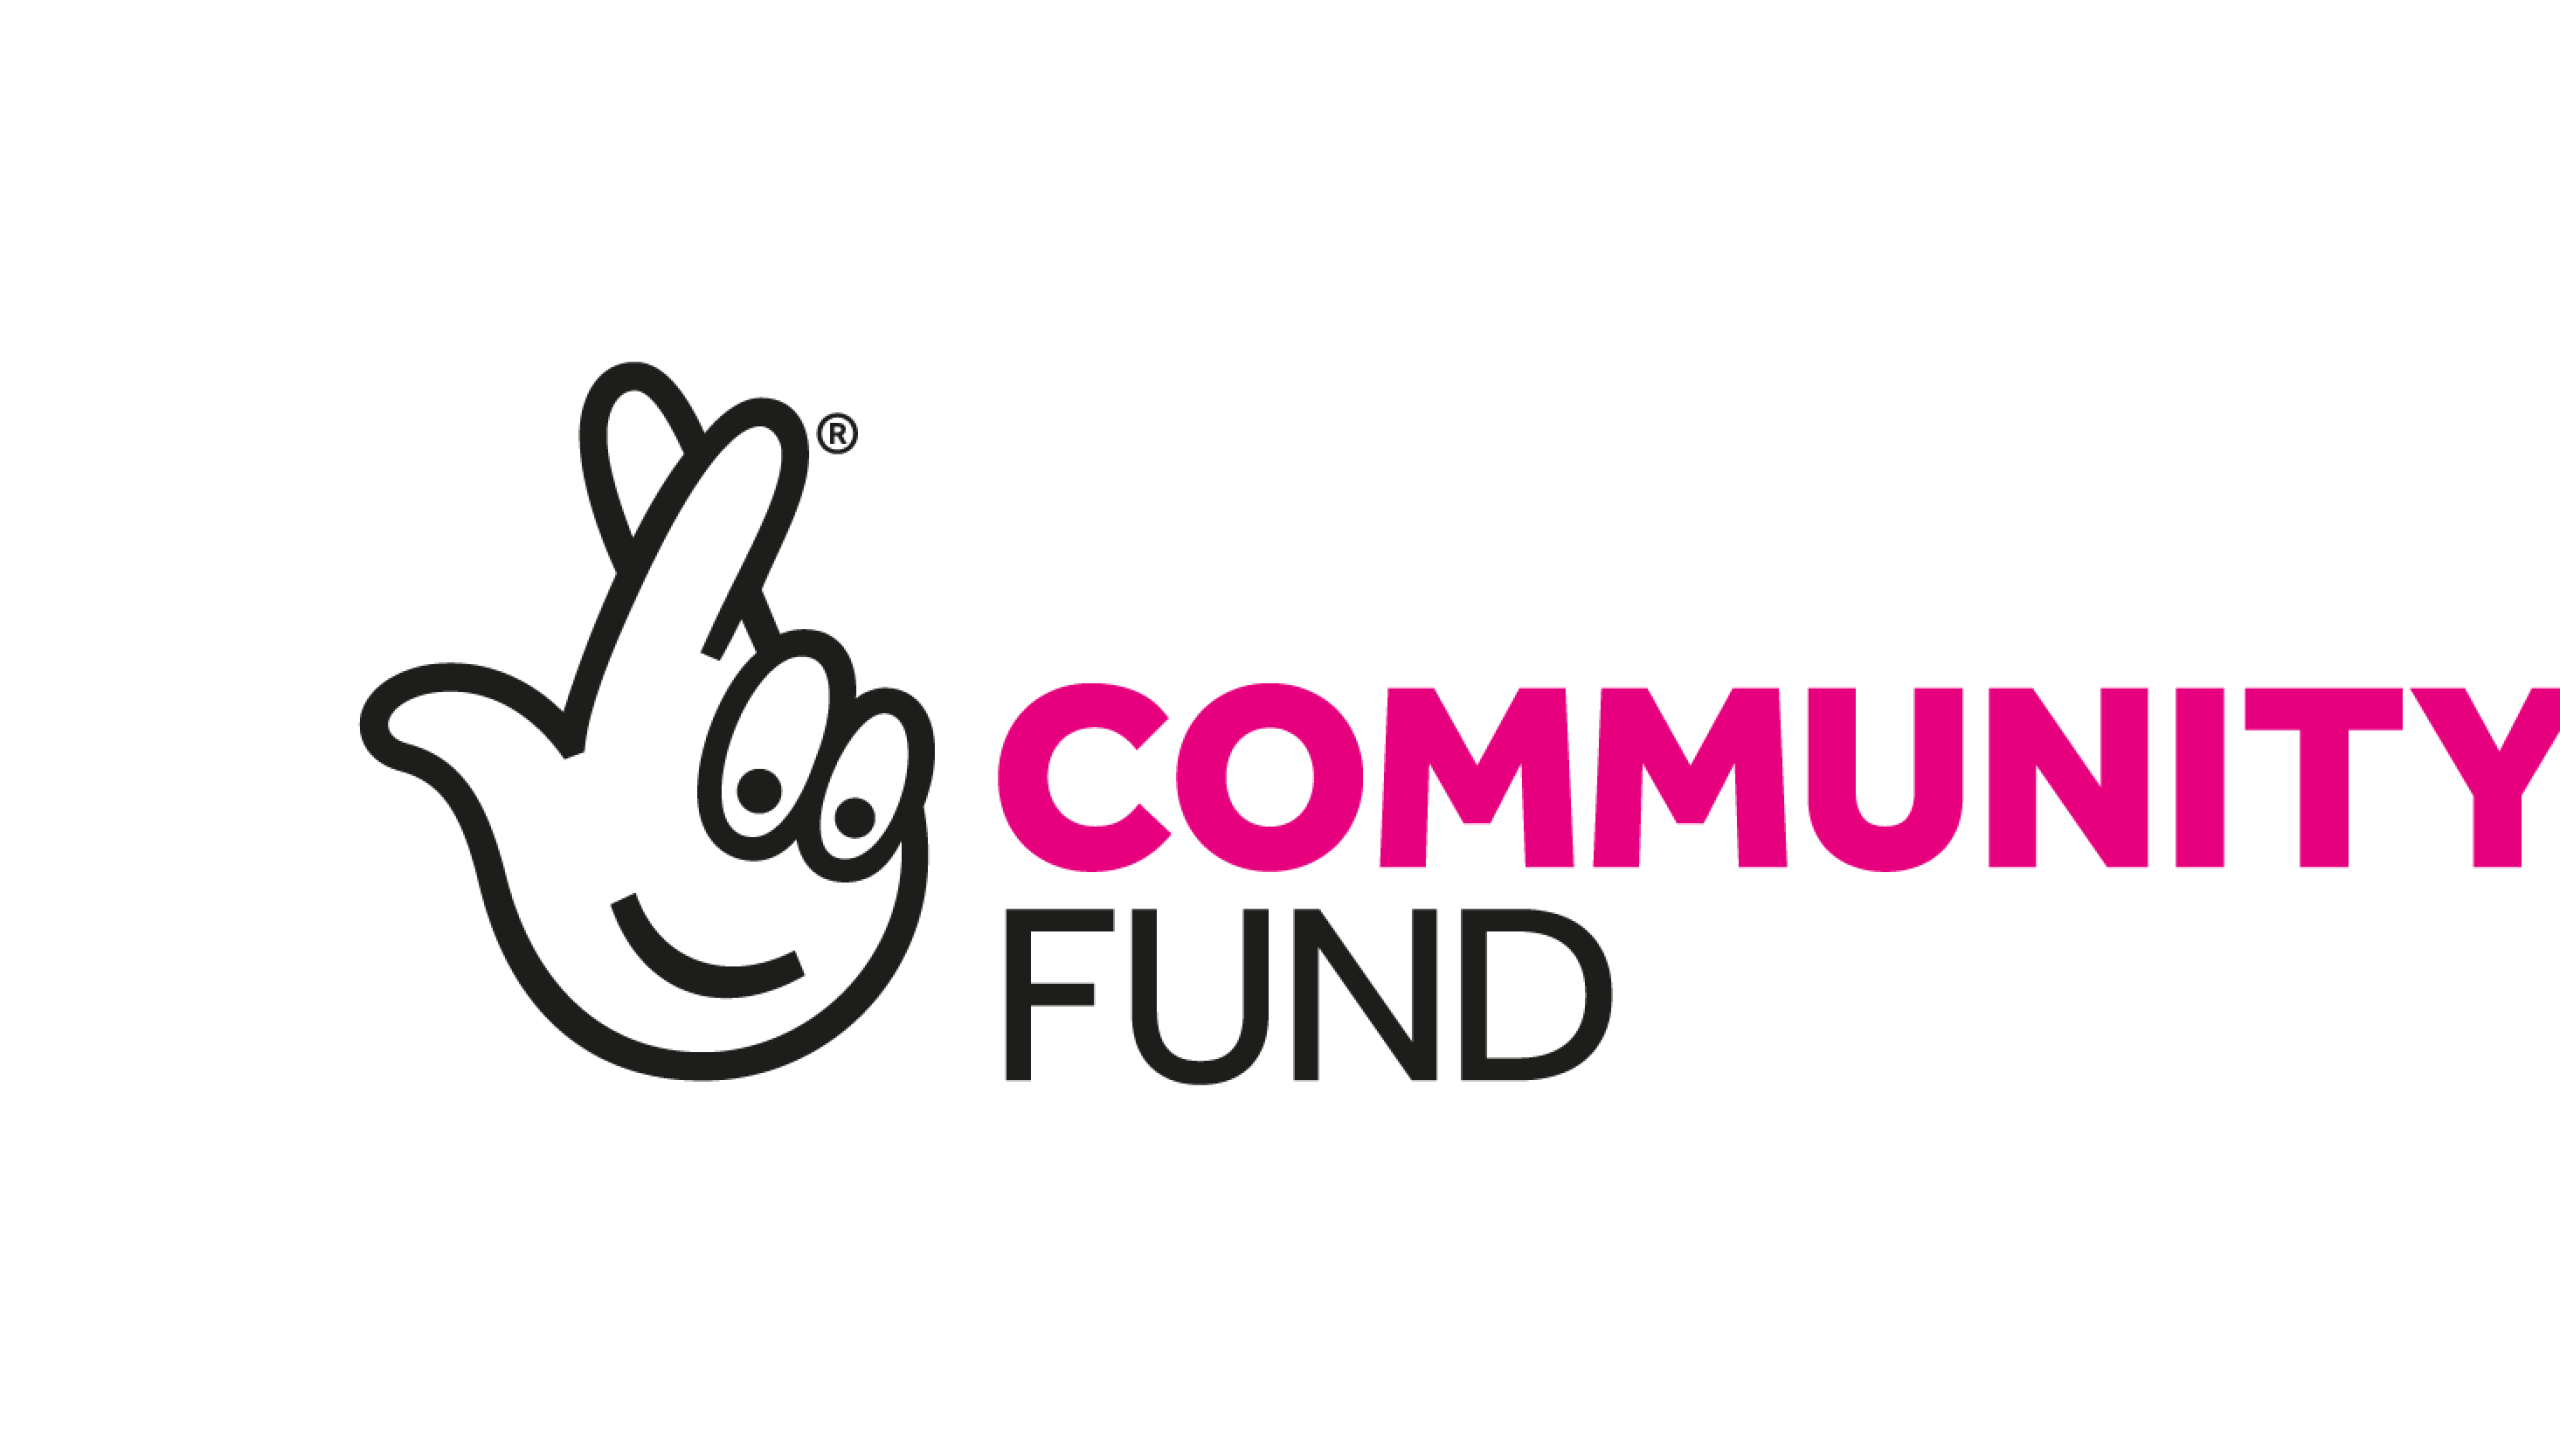 A hand with fingers crossed with the words 'Community Fund' alongside